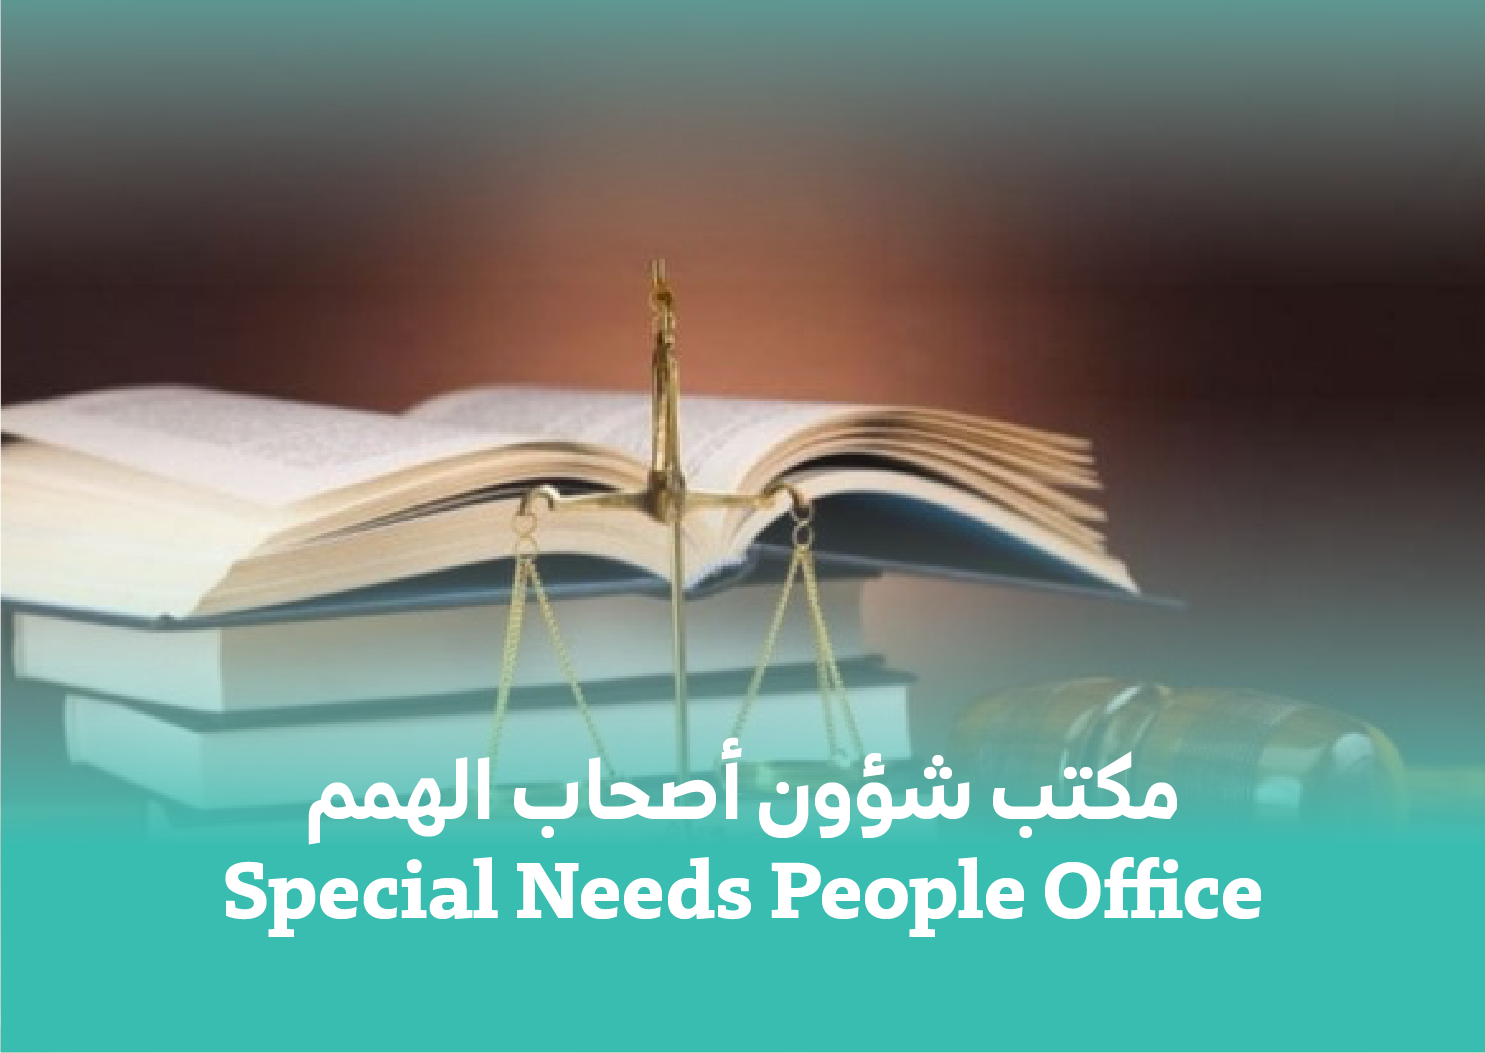  Special Needs People Office